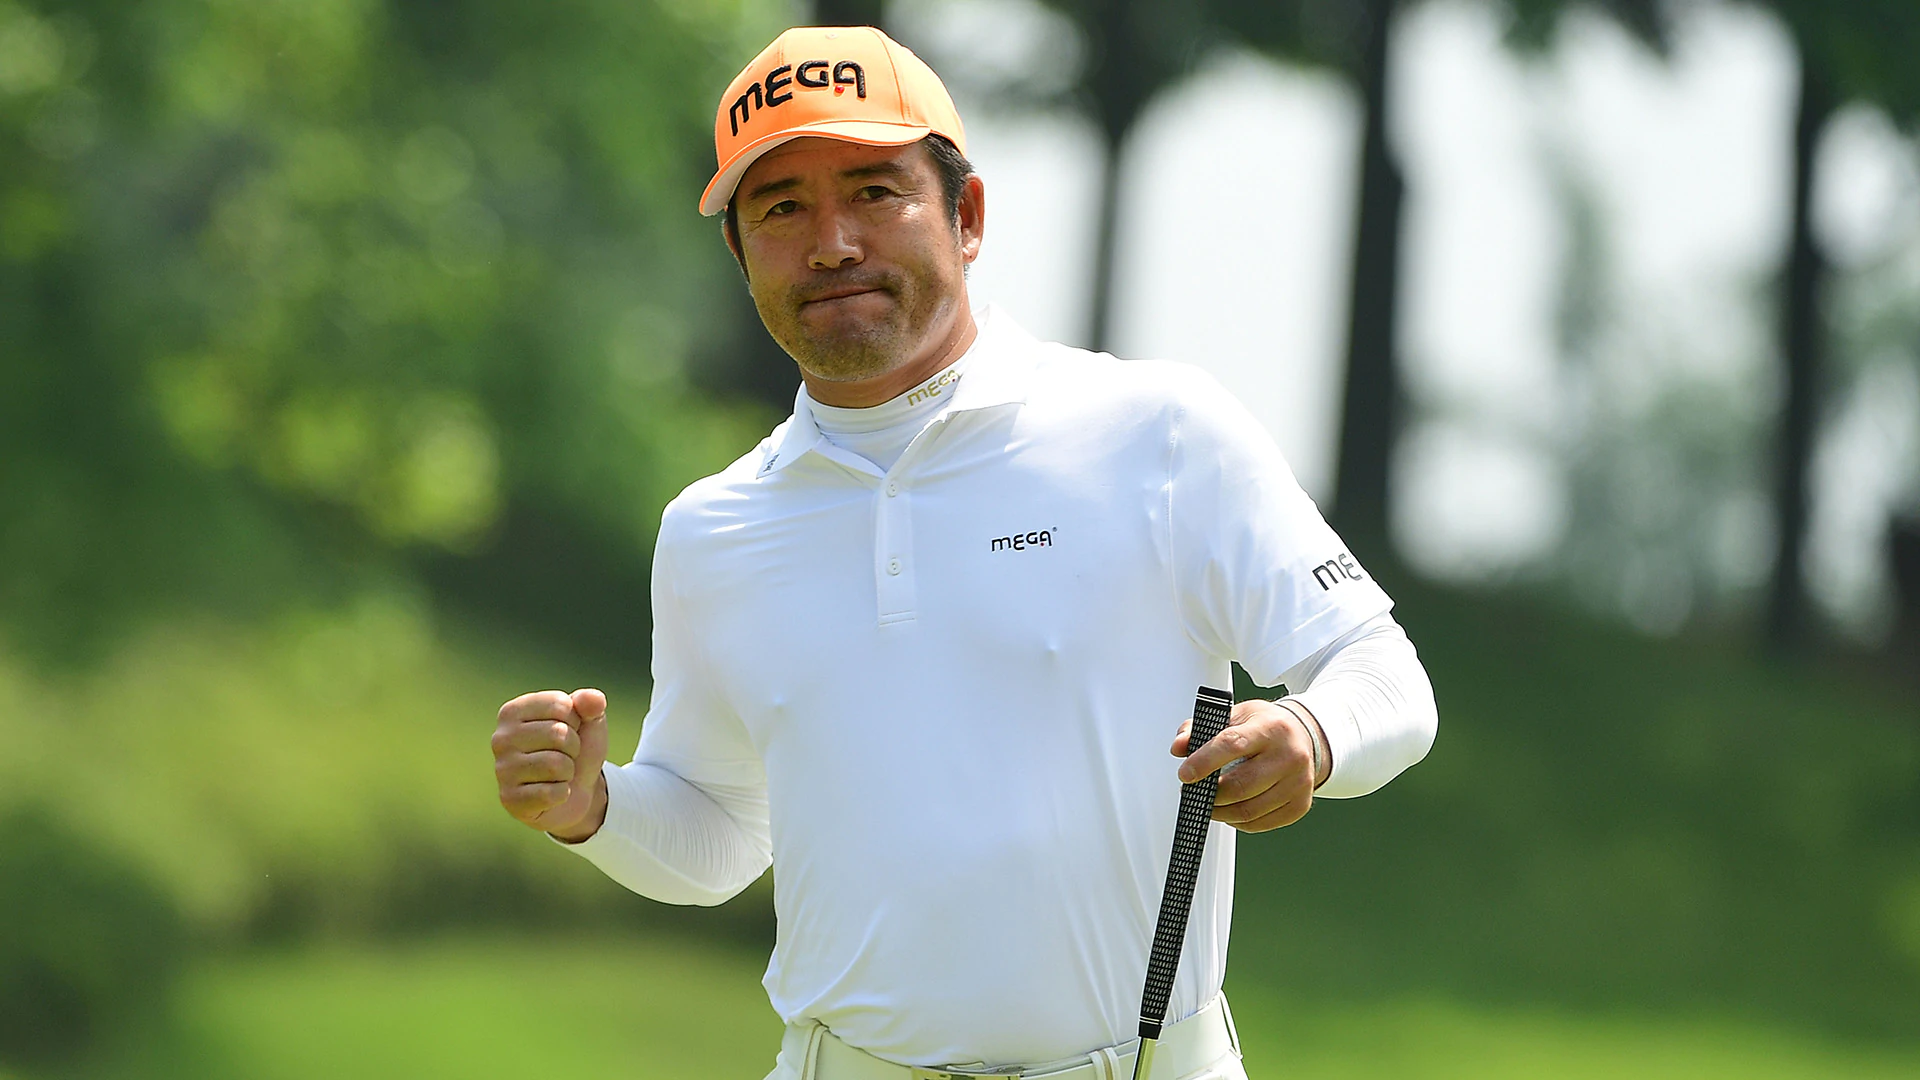 Choi's unique swing nets victory in Japan